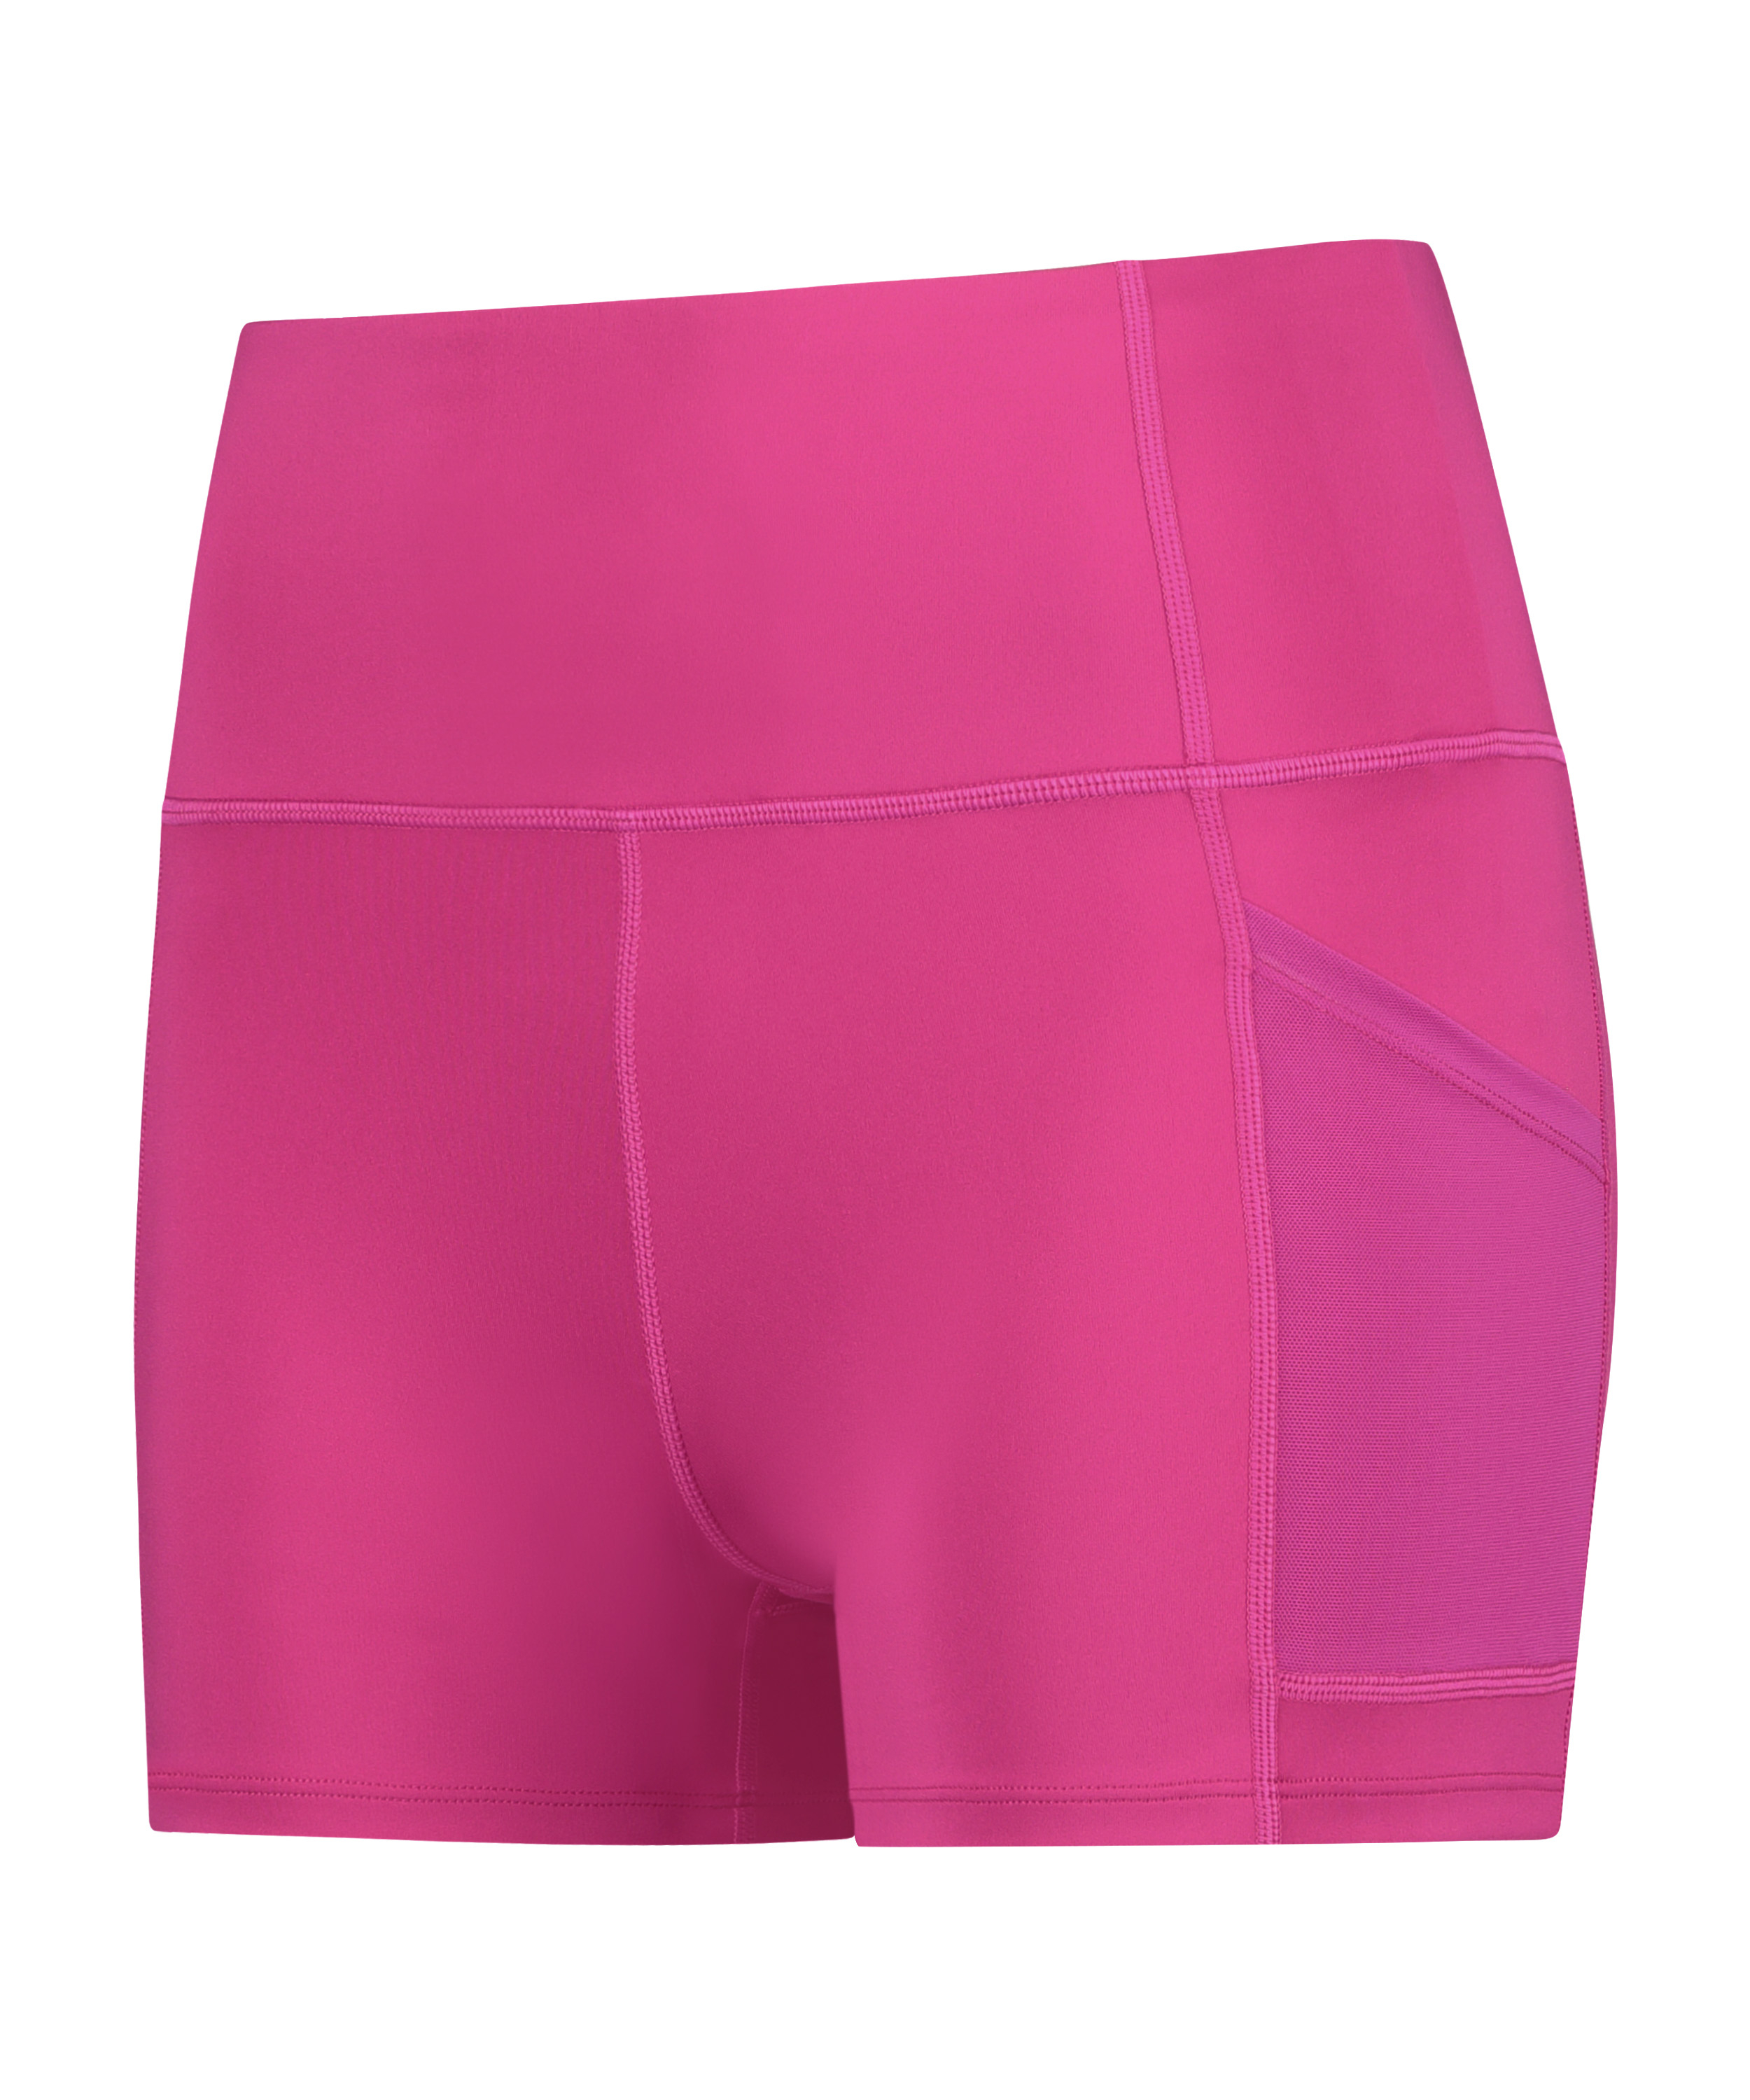 HKMX Shorts Oh My Squat mit hoher Taille, Rosa, main